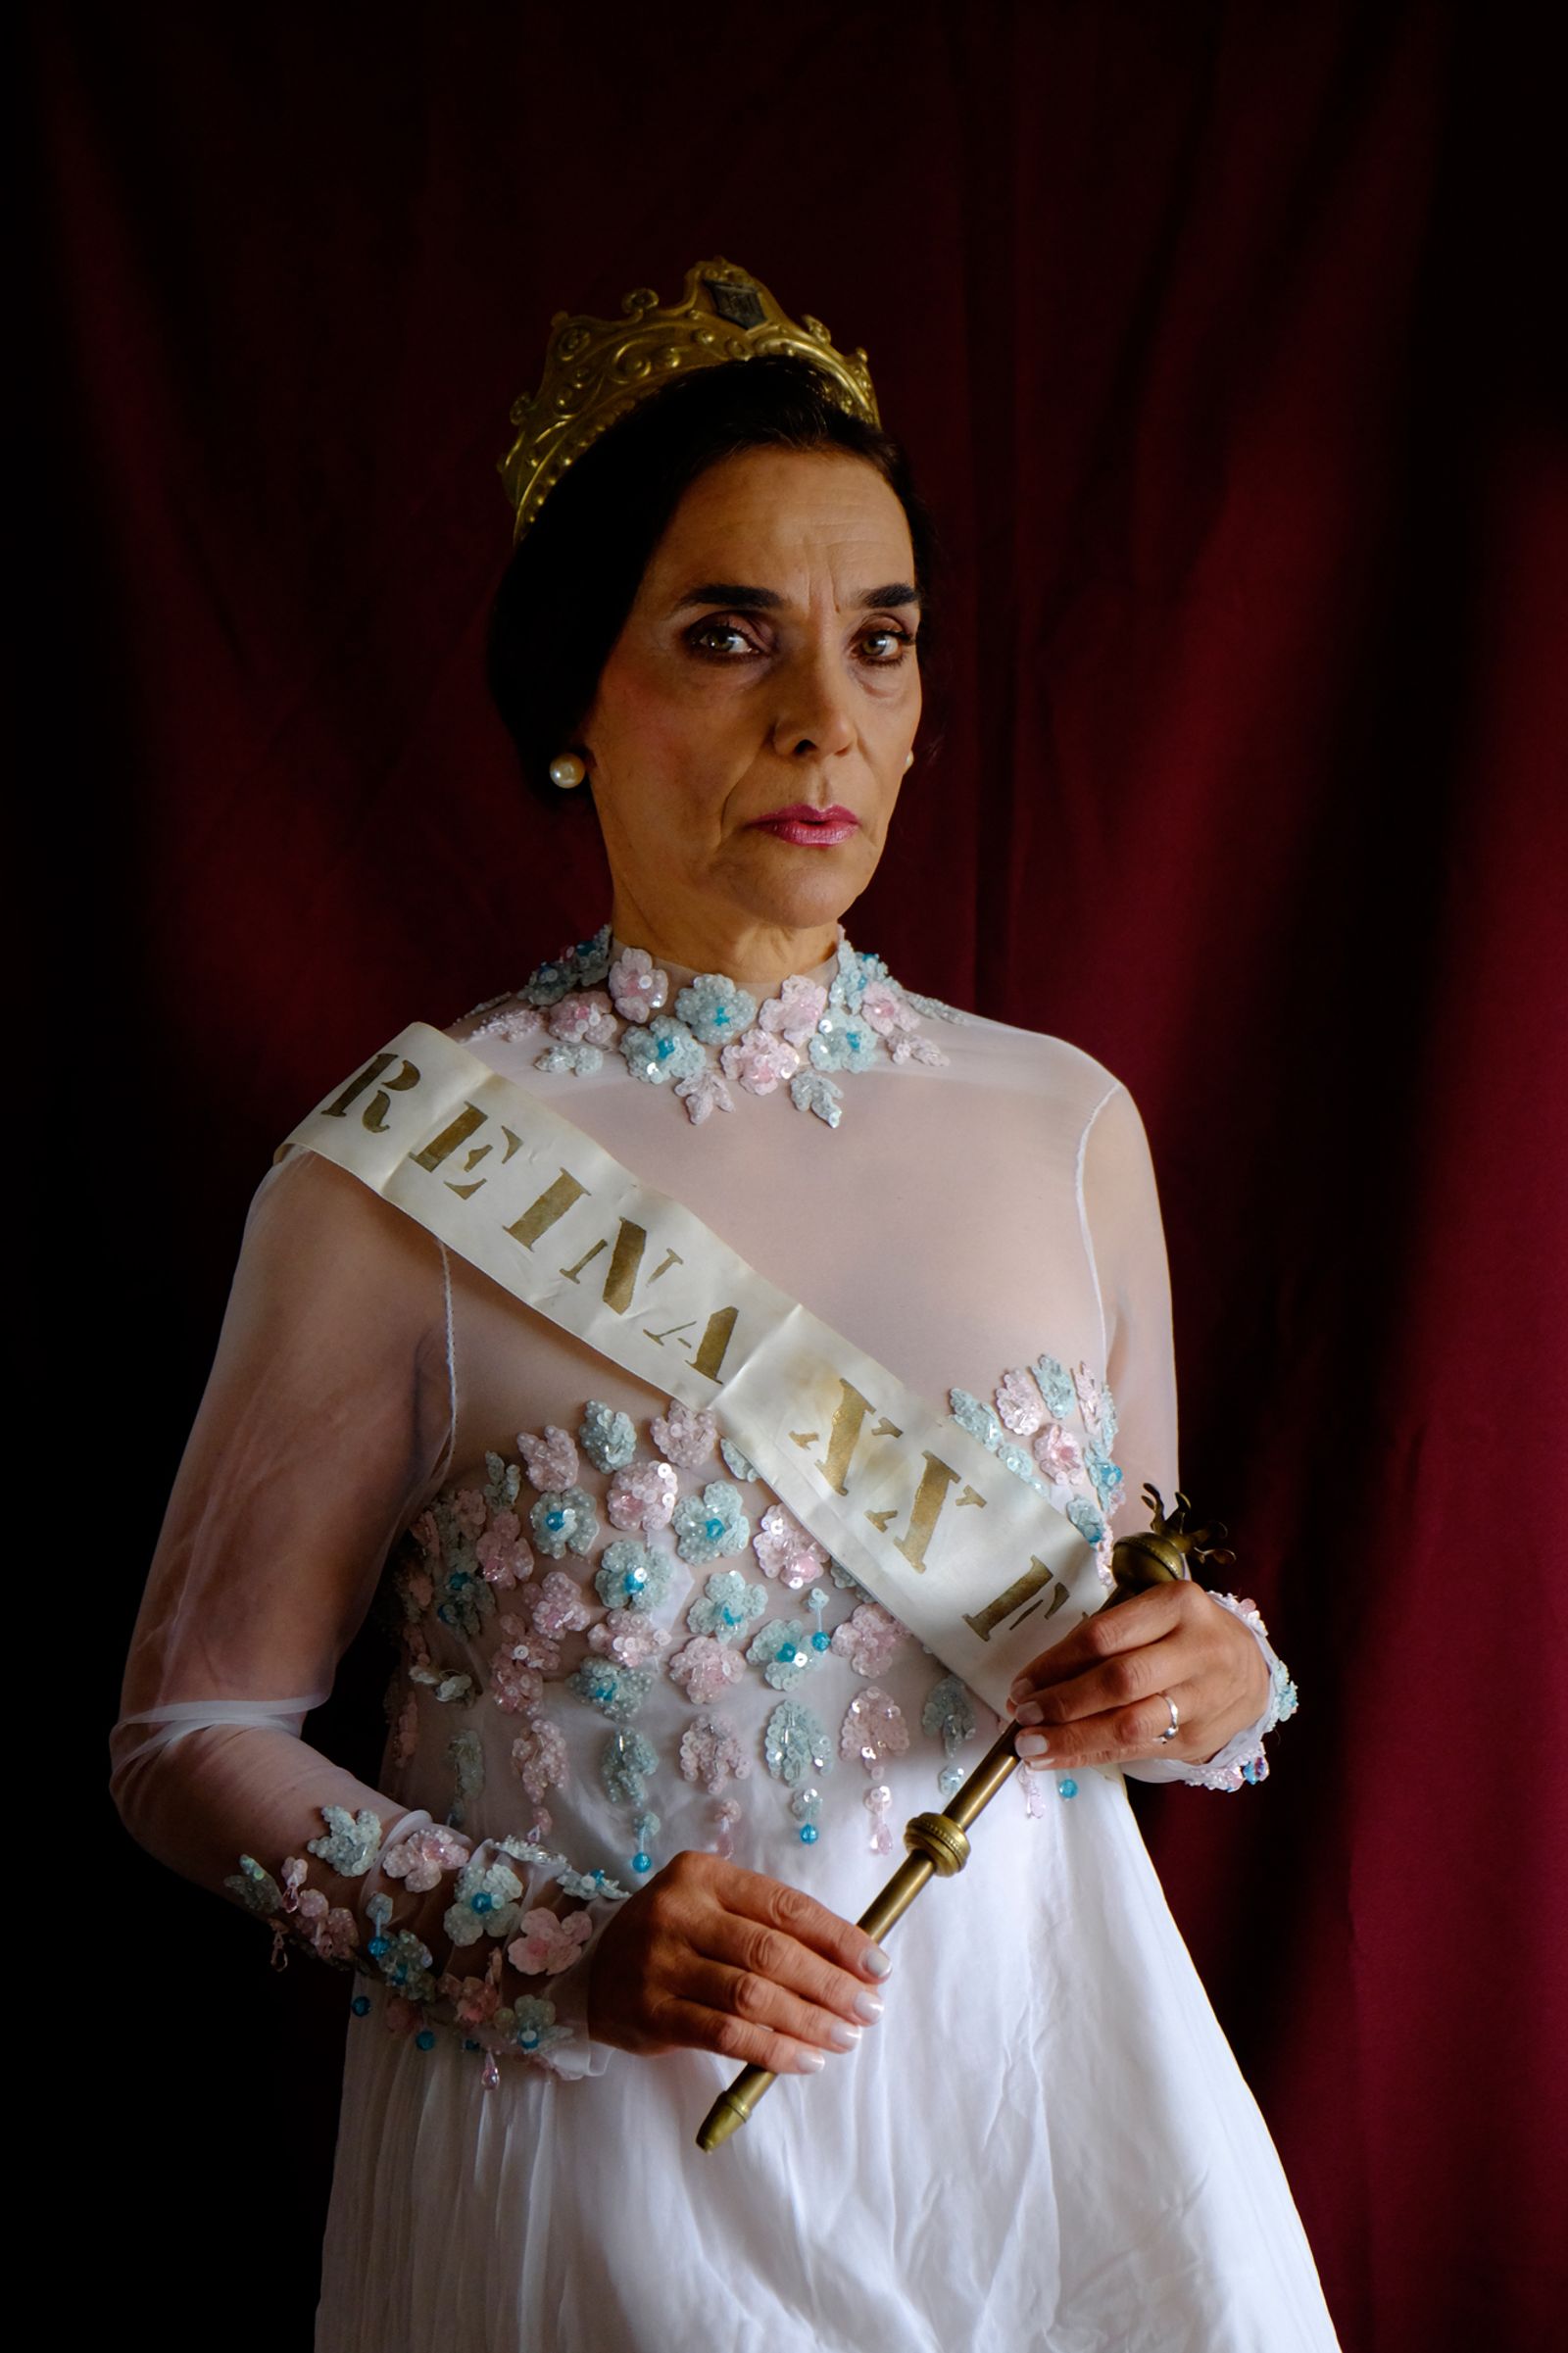 © Santiago Escobar-Jaramillo - Beauty Pageant 1973-2017. My mother kept the original dress, crown, band and jewels from 1973 to date.